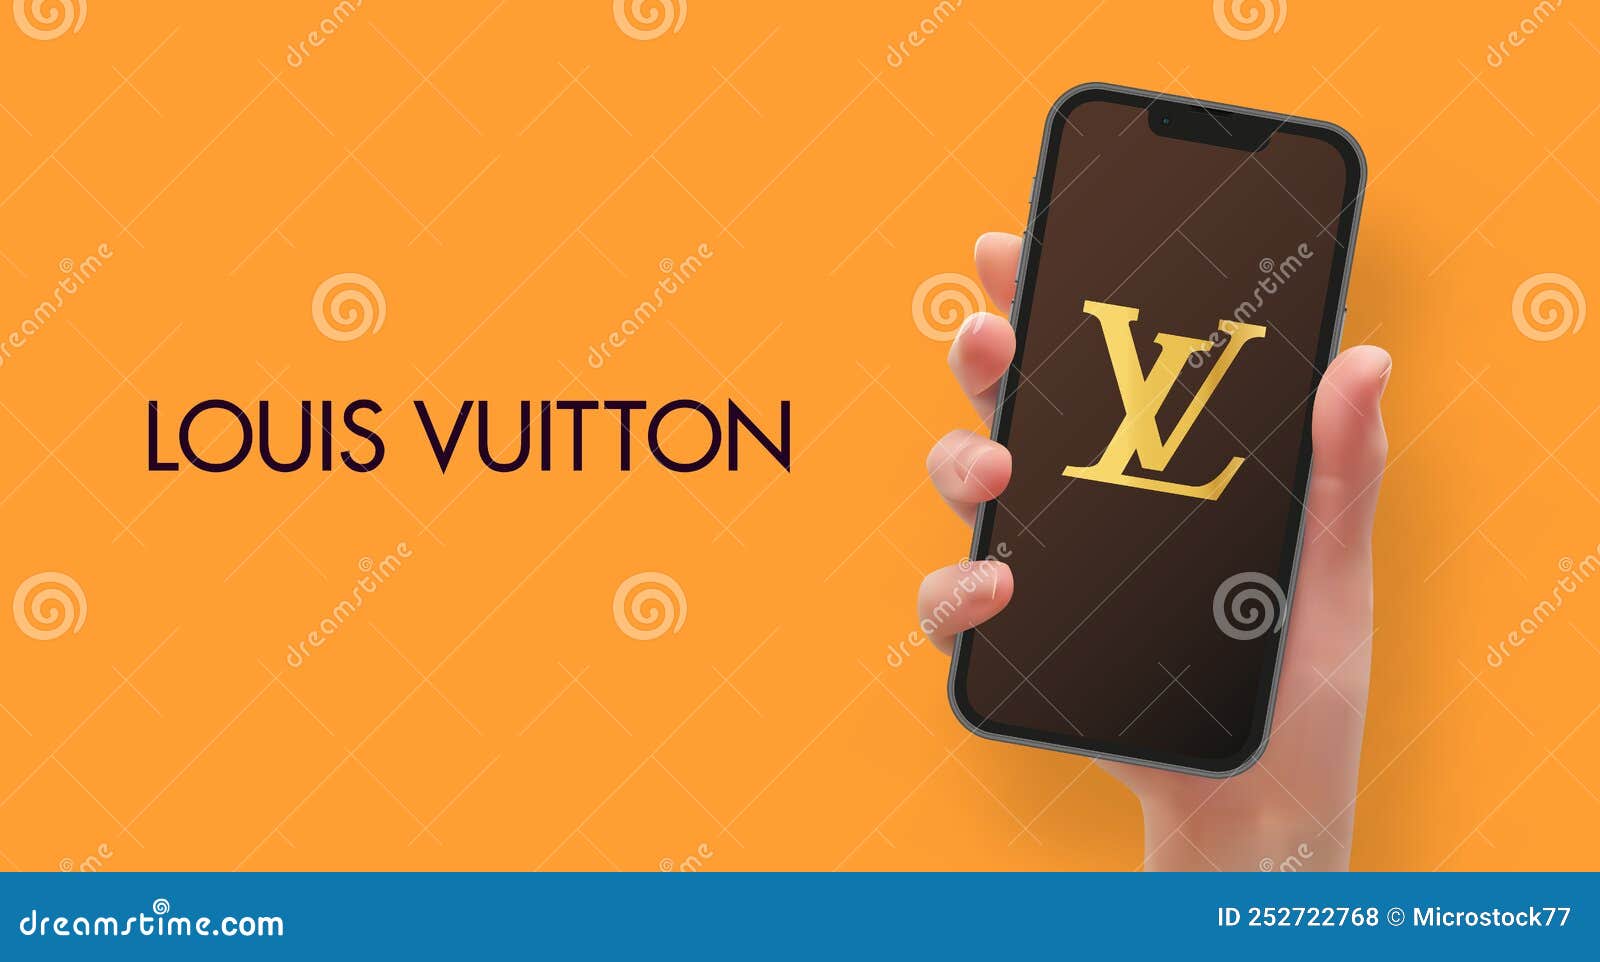 Louis Vuitton Logo Cliparts, Stock Vector and Royalty Free Louis